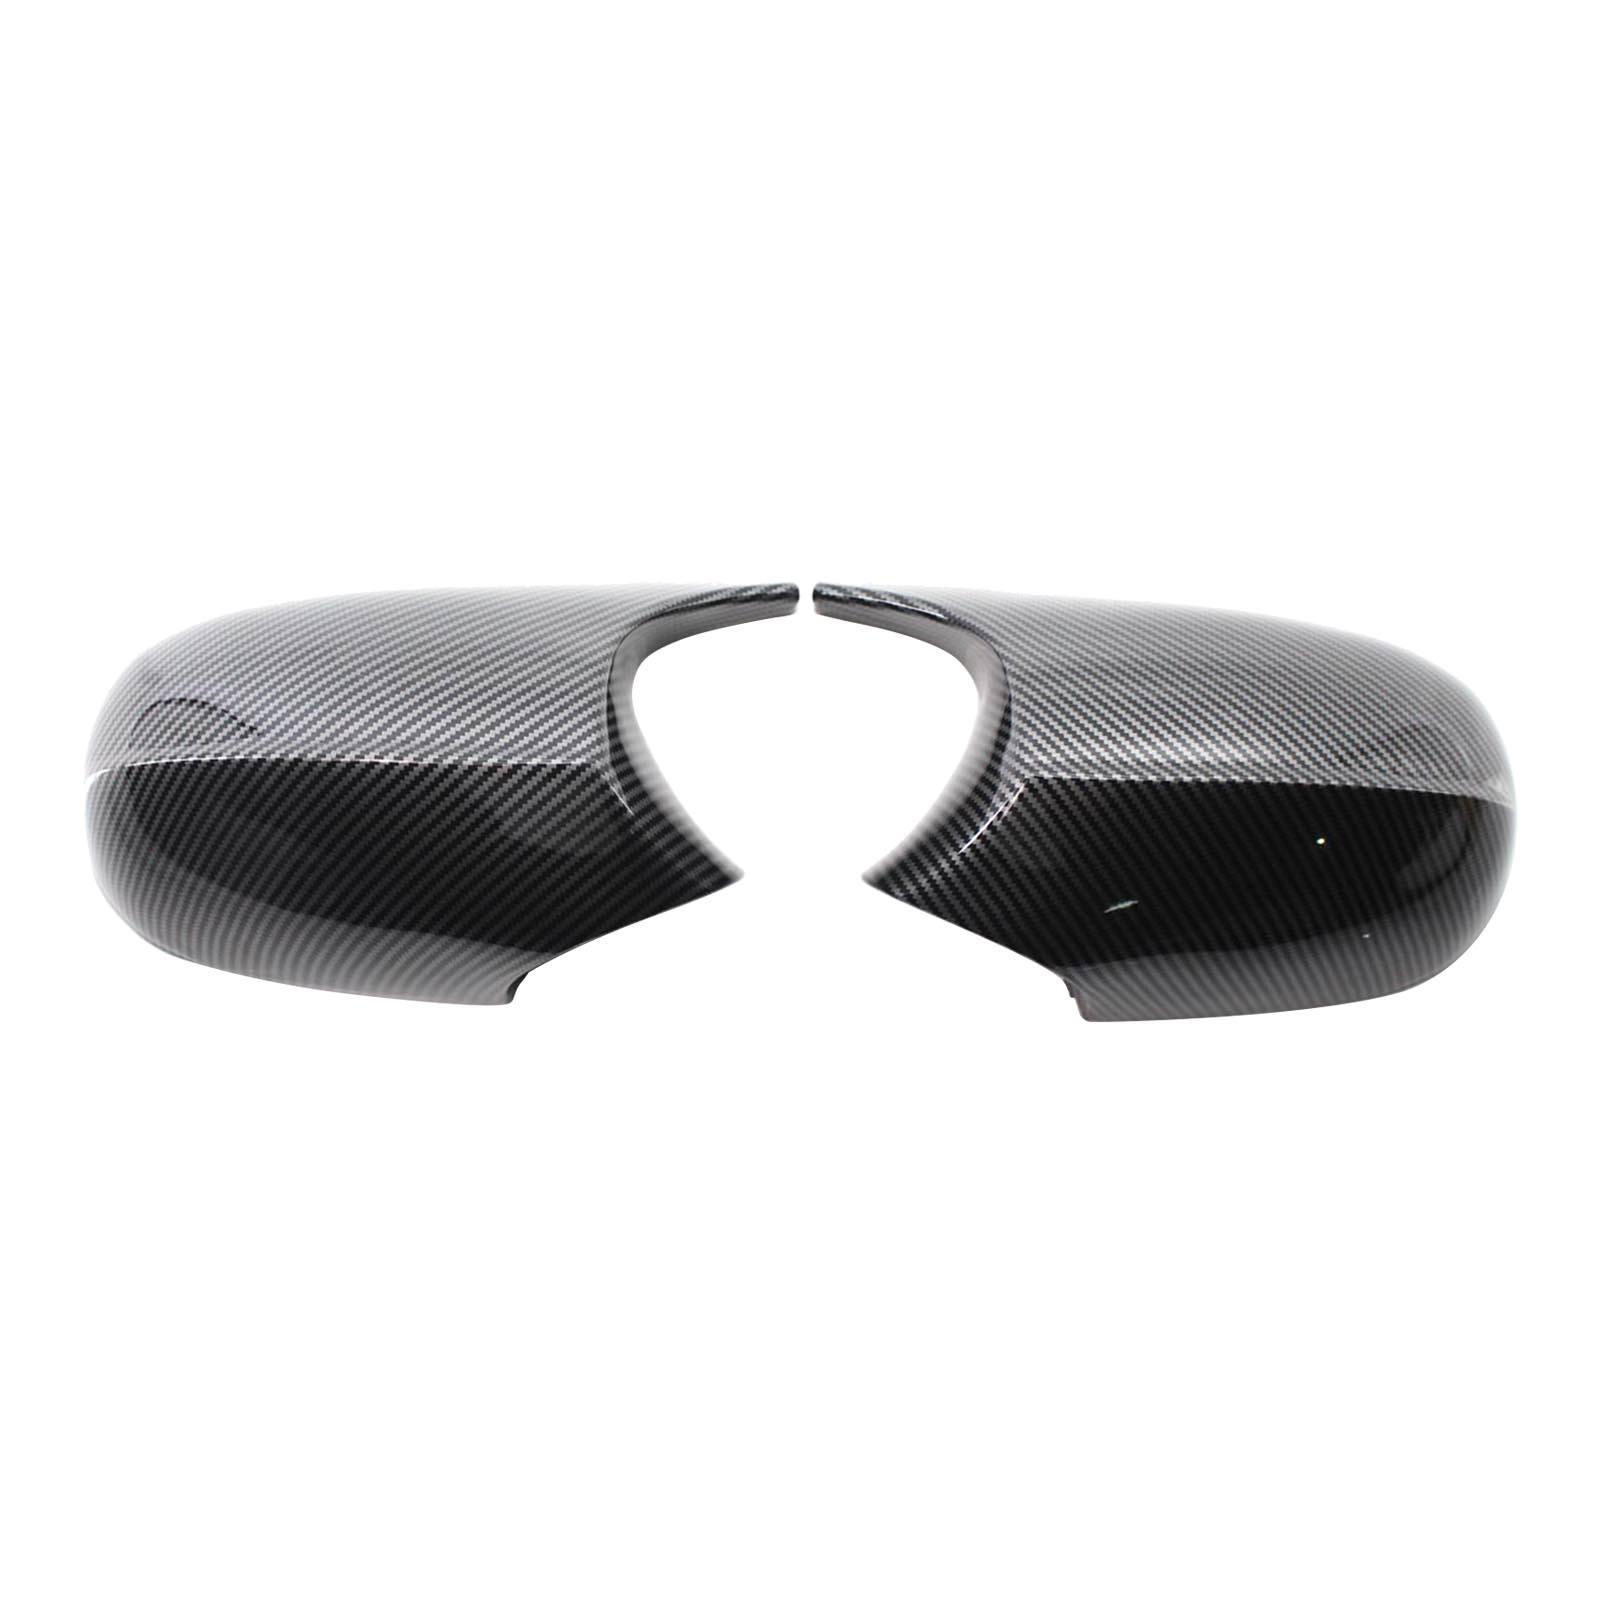 2 Pieces M3 Style Side Mirror Rearview Covers fits for BMW E90 E91 E92 E93